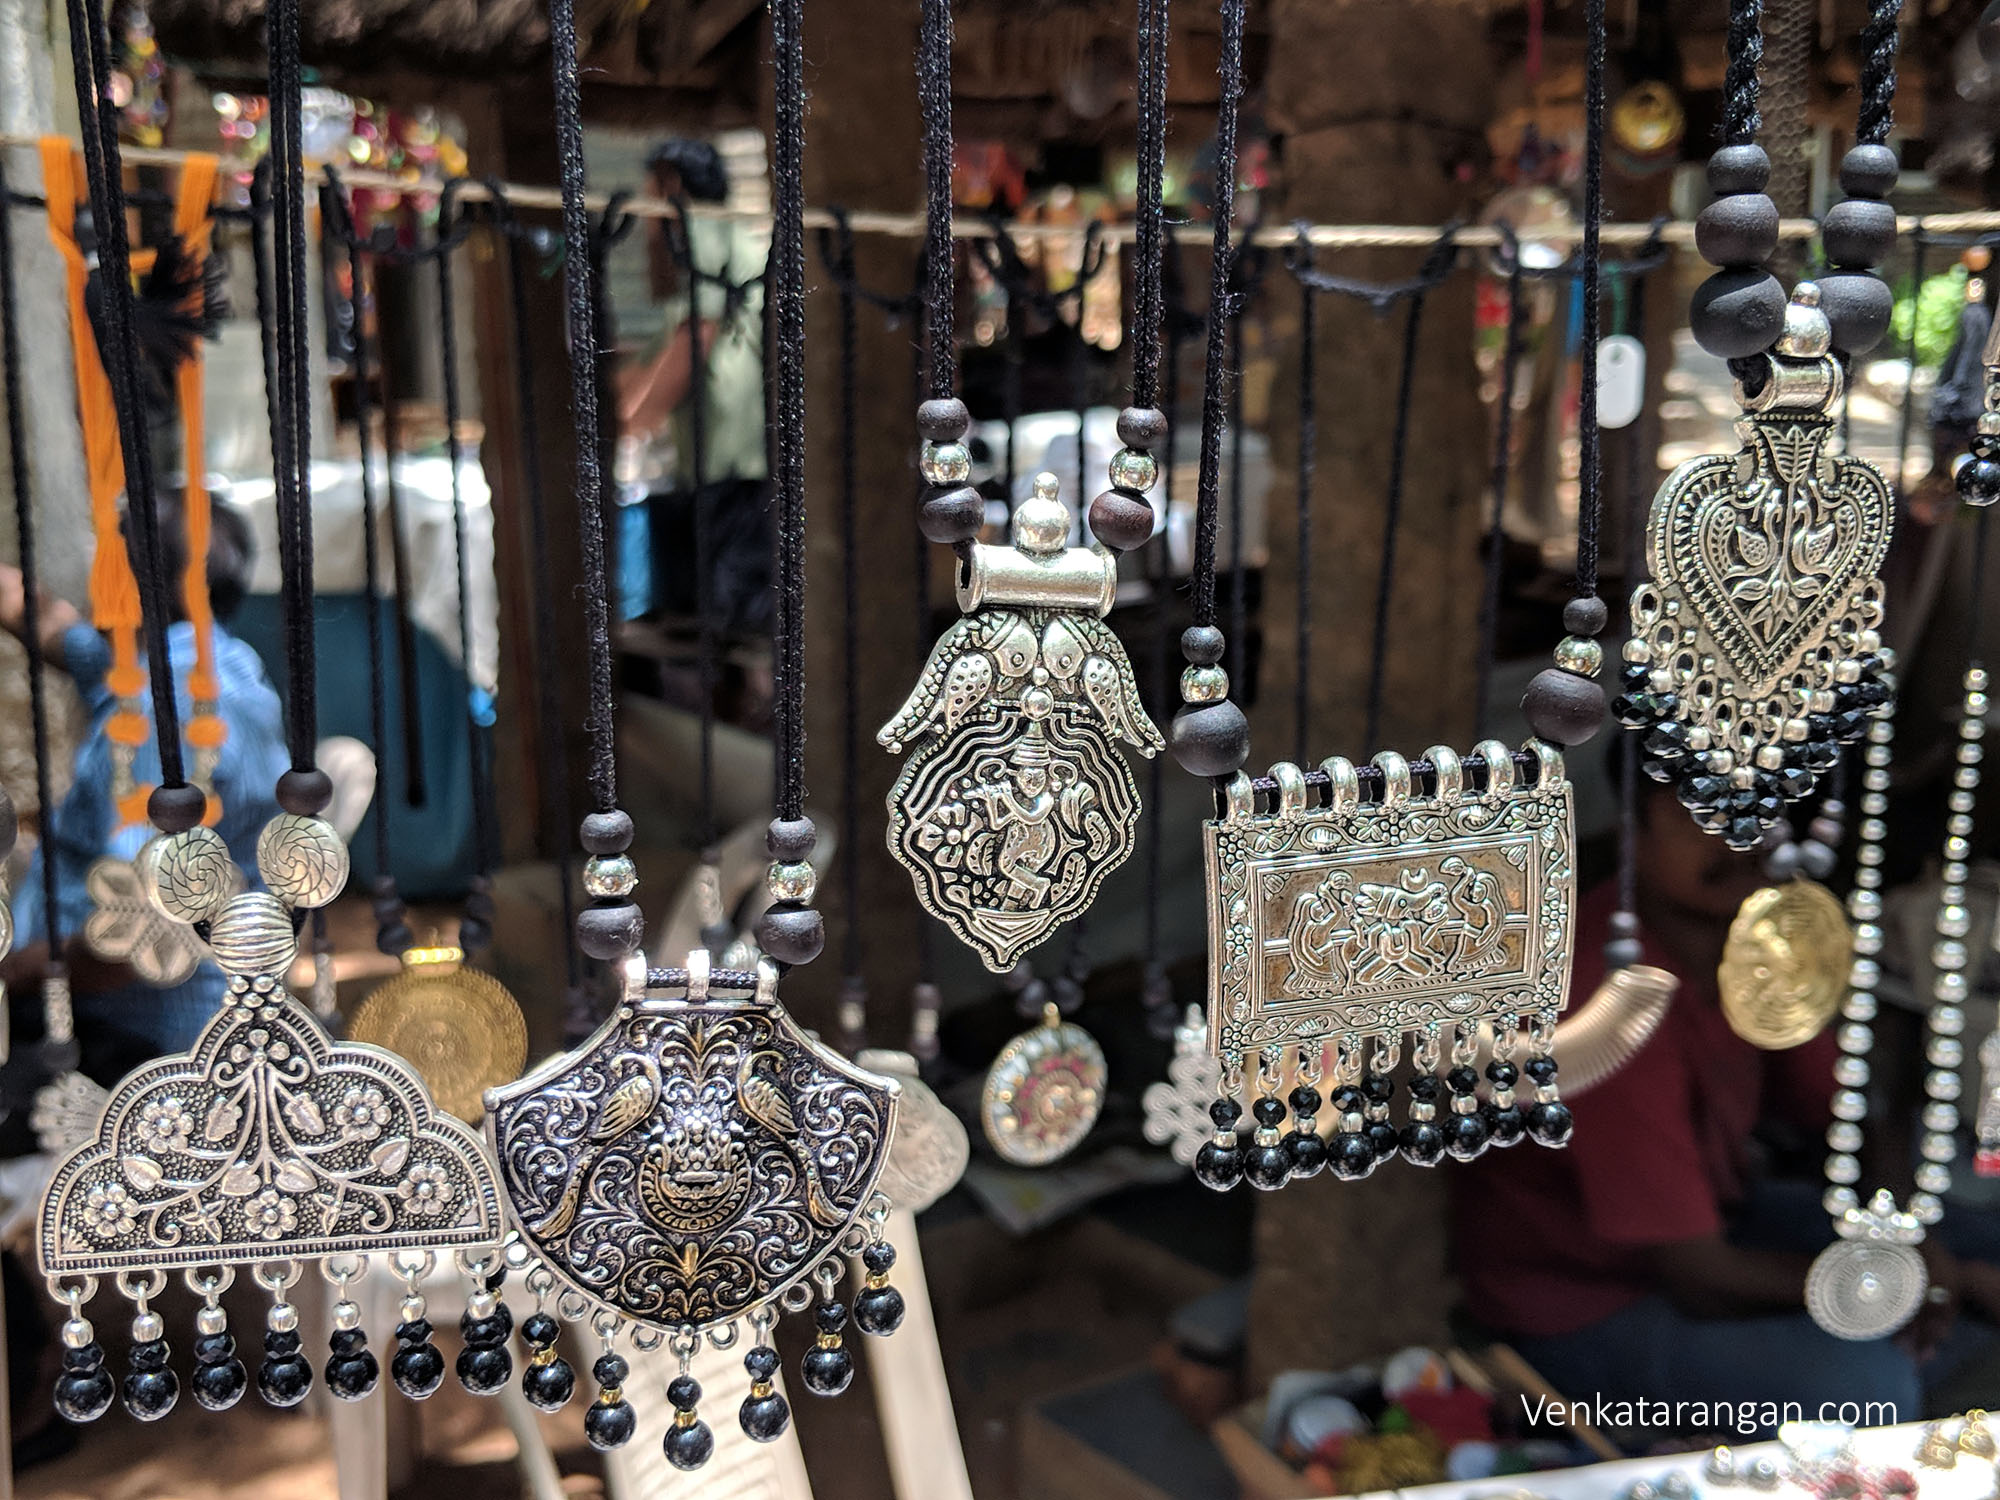 Shops manned by craftsmen sell beautiful jewellery, pottery and textile